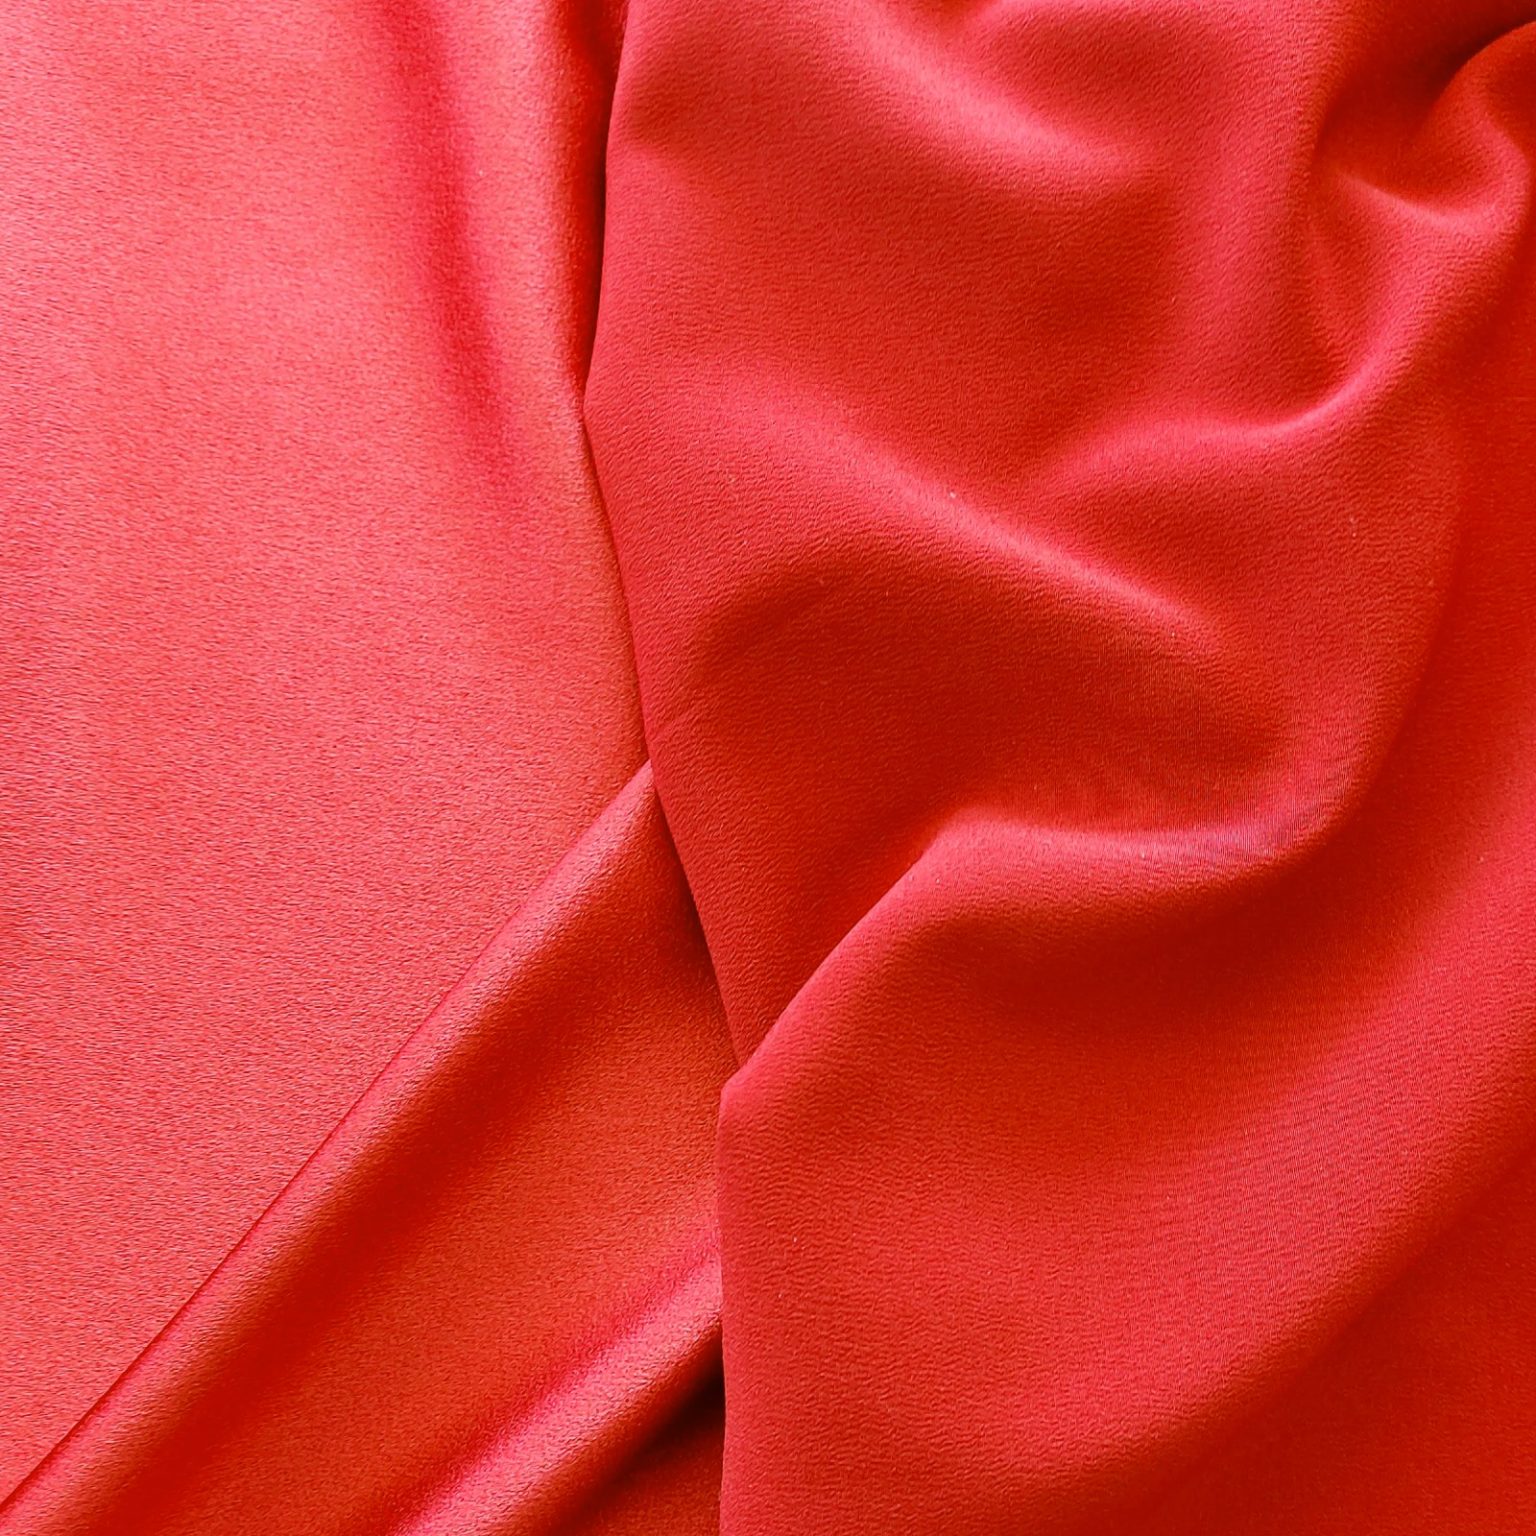 Satin Back Crepe PolyestervDress Fabric | Red Crepe Polyester | More Sewing